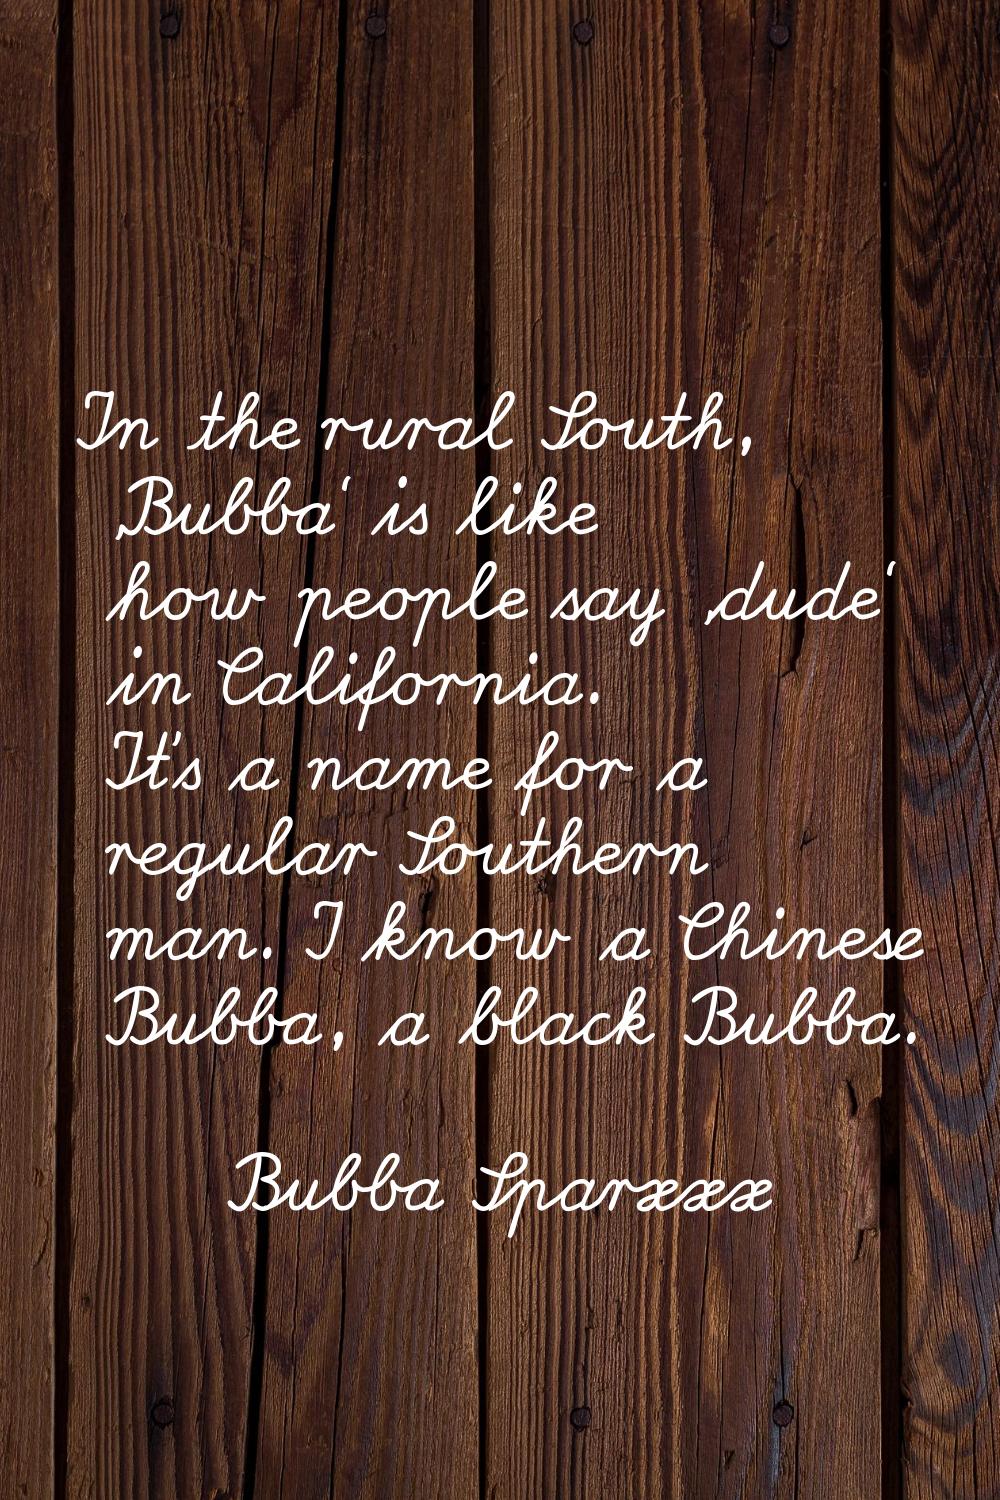 In the rural South, 'Bubba' is like how people say 'dude' in California. It's a name for a regular 